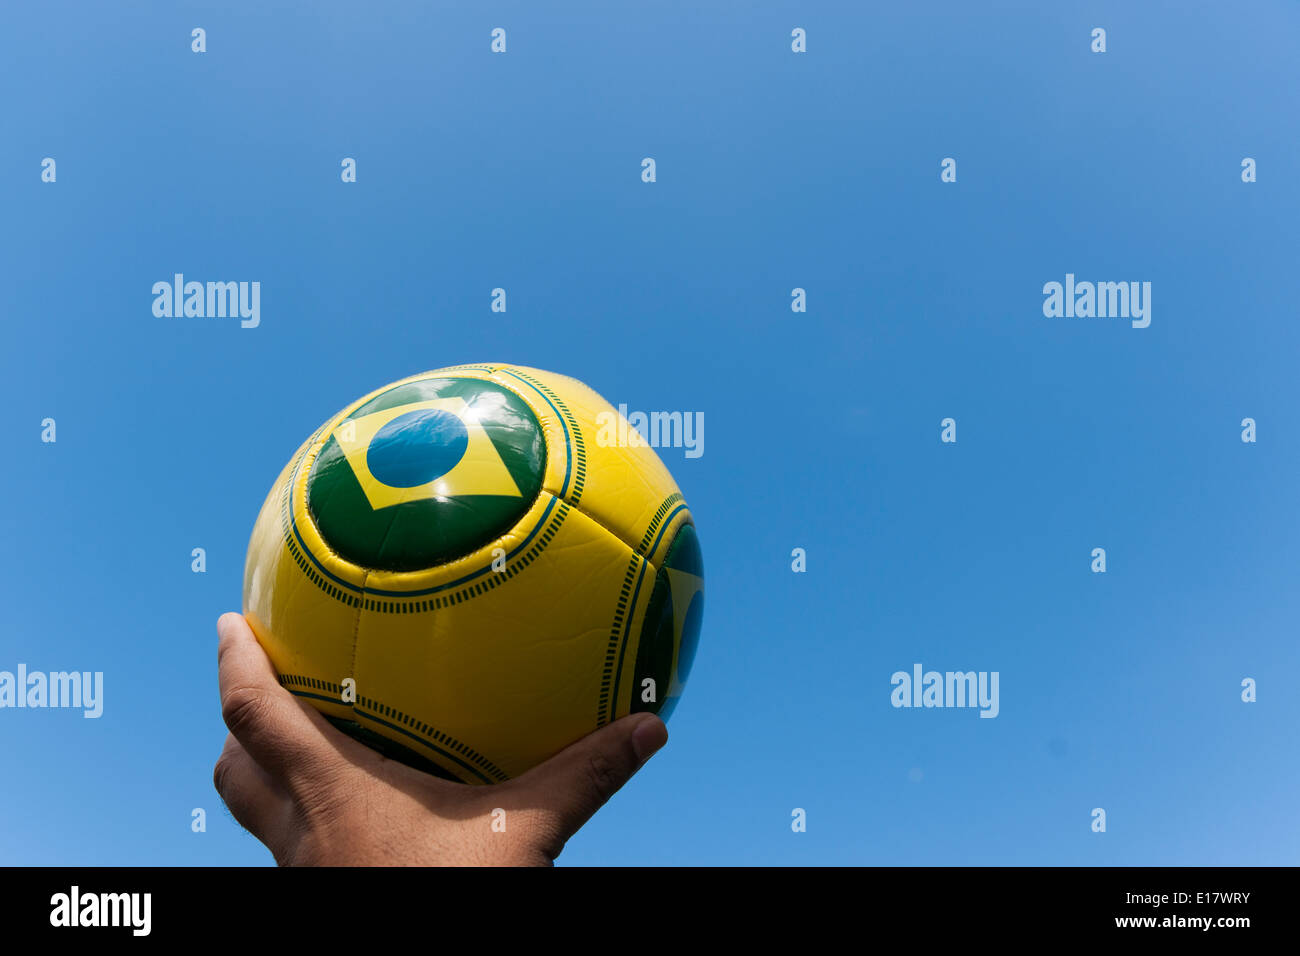 Man holding football in sky for Brazil World Cup 2014. Stock Photo